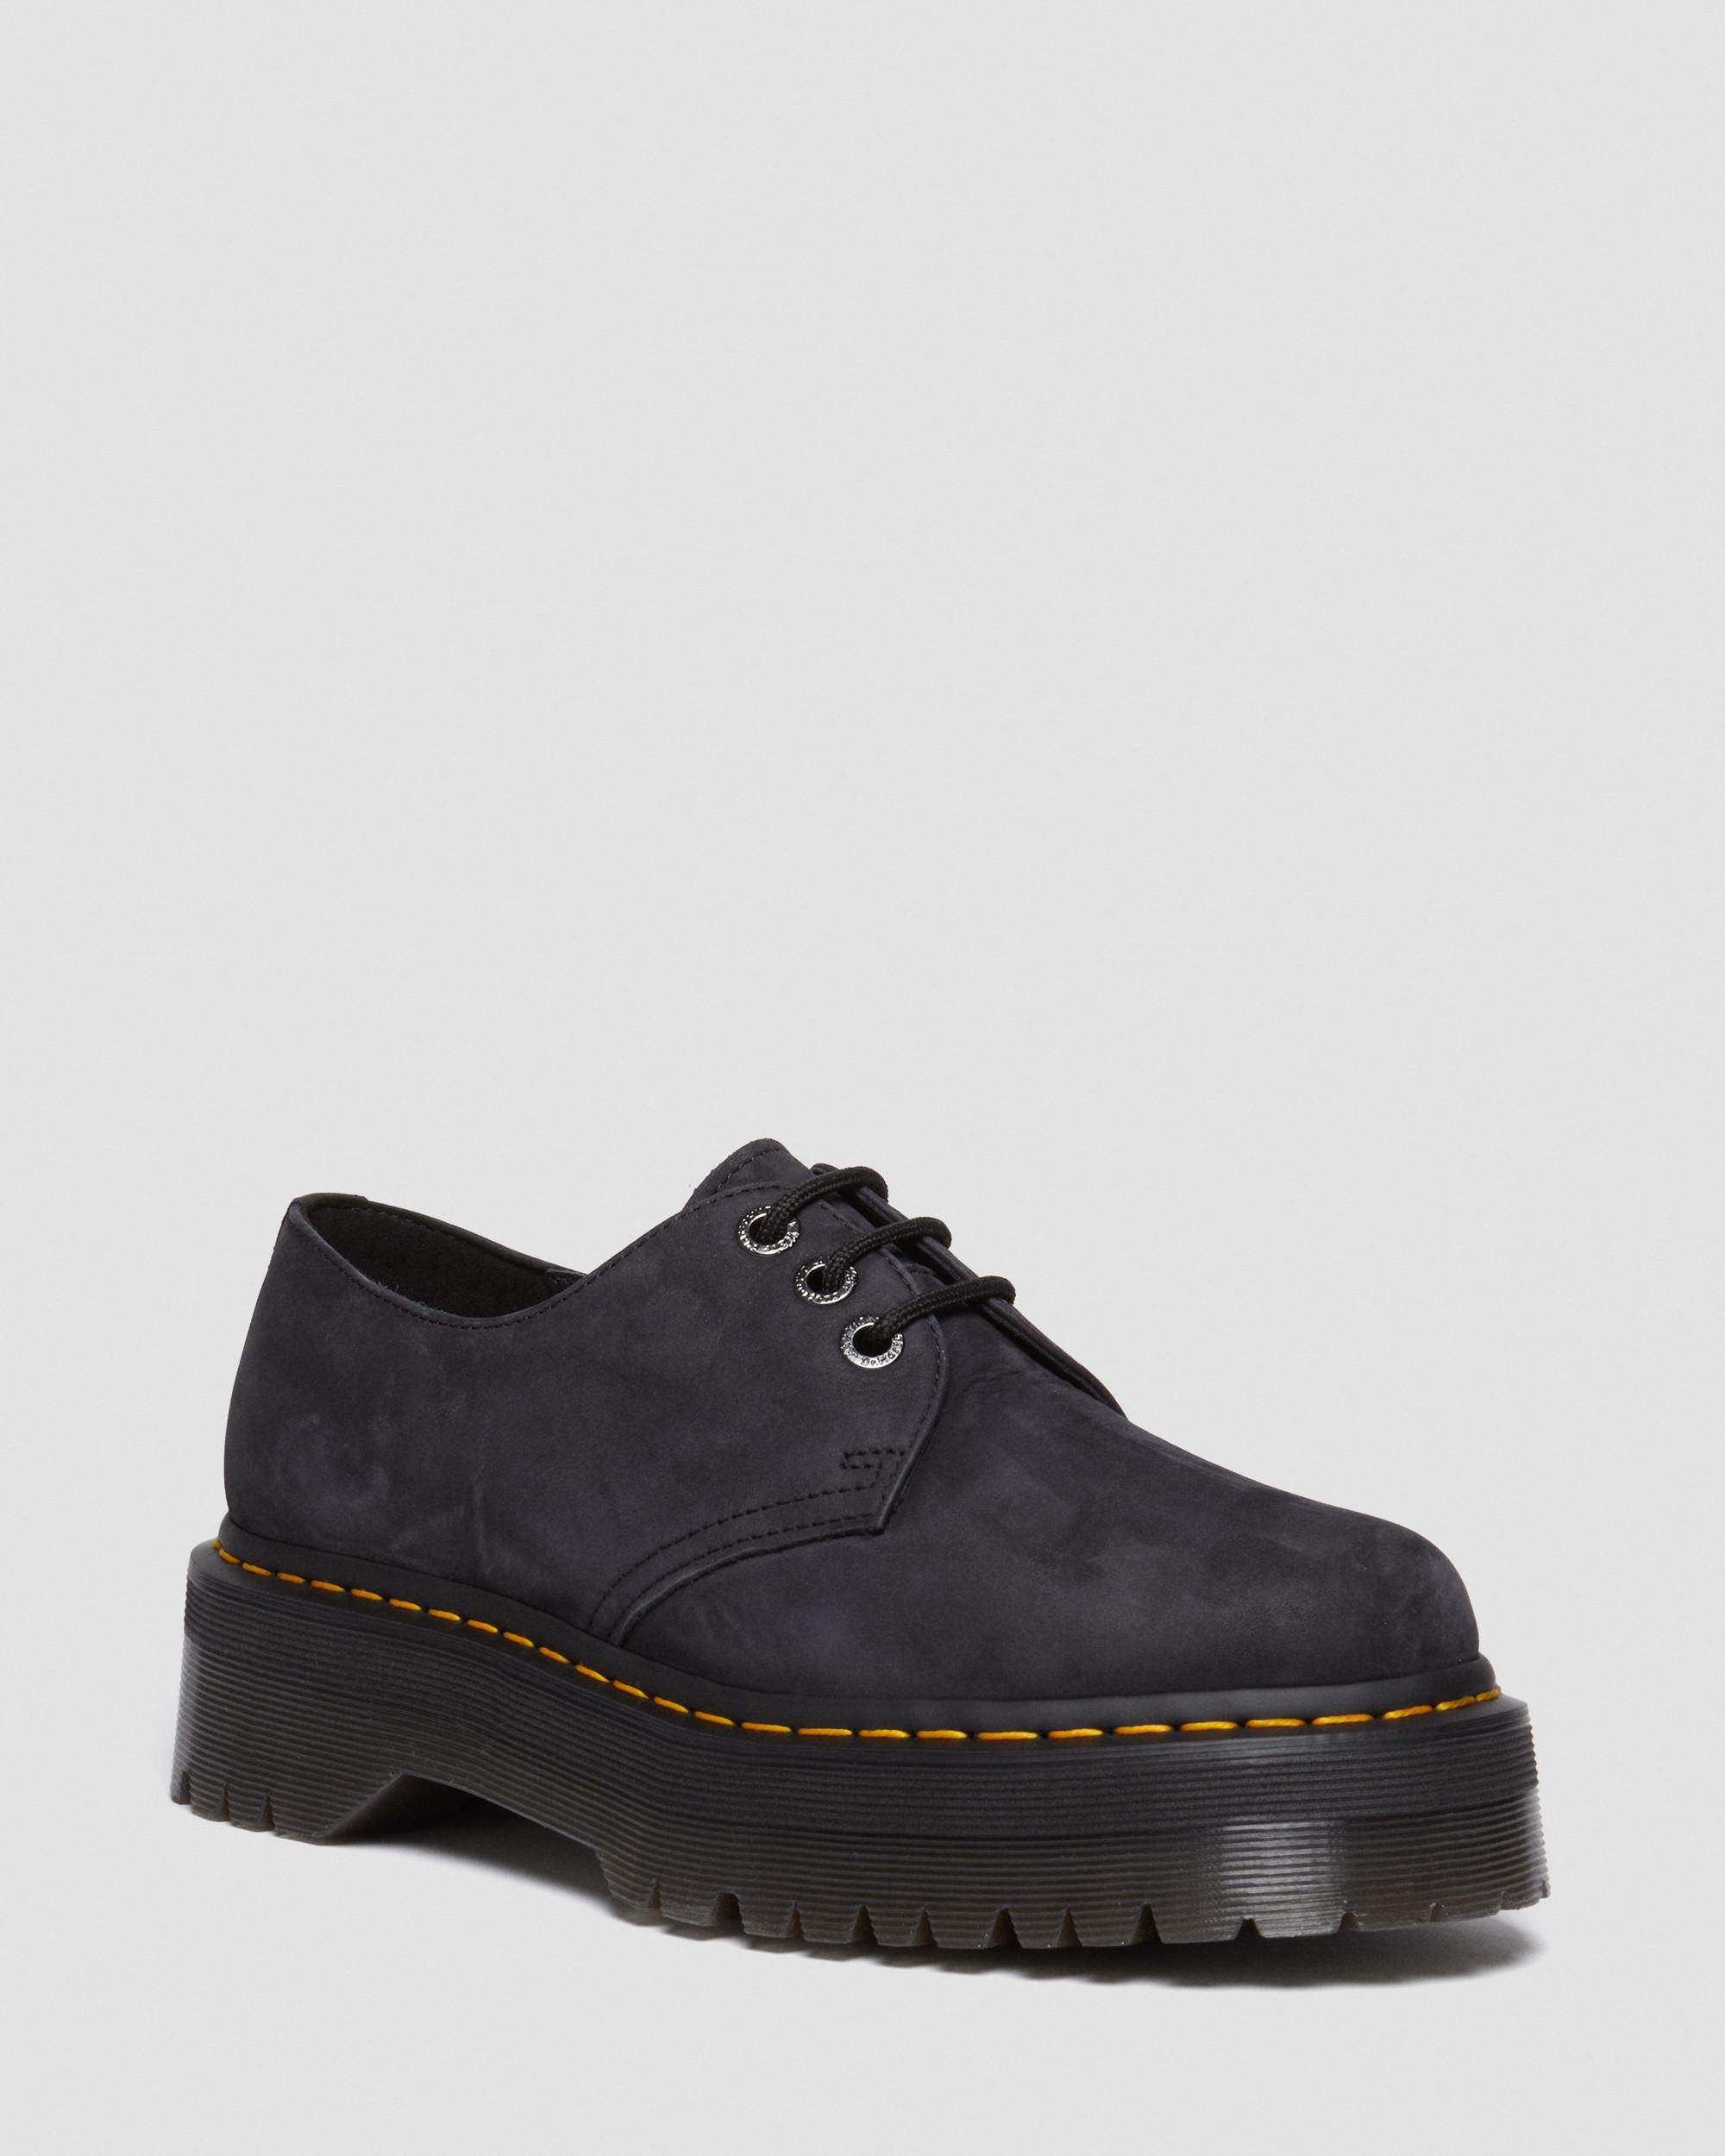 1461 Mono Smooth Leather Oxford Shoes, Black | Dr. Martens